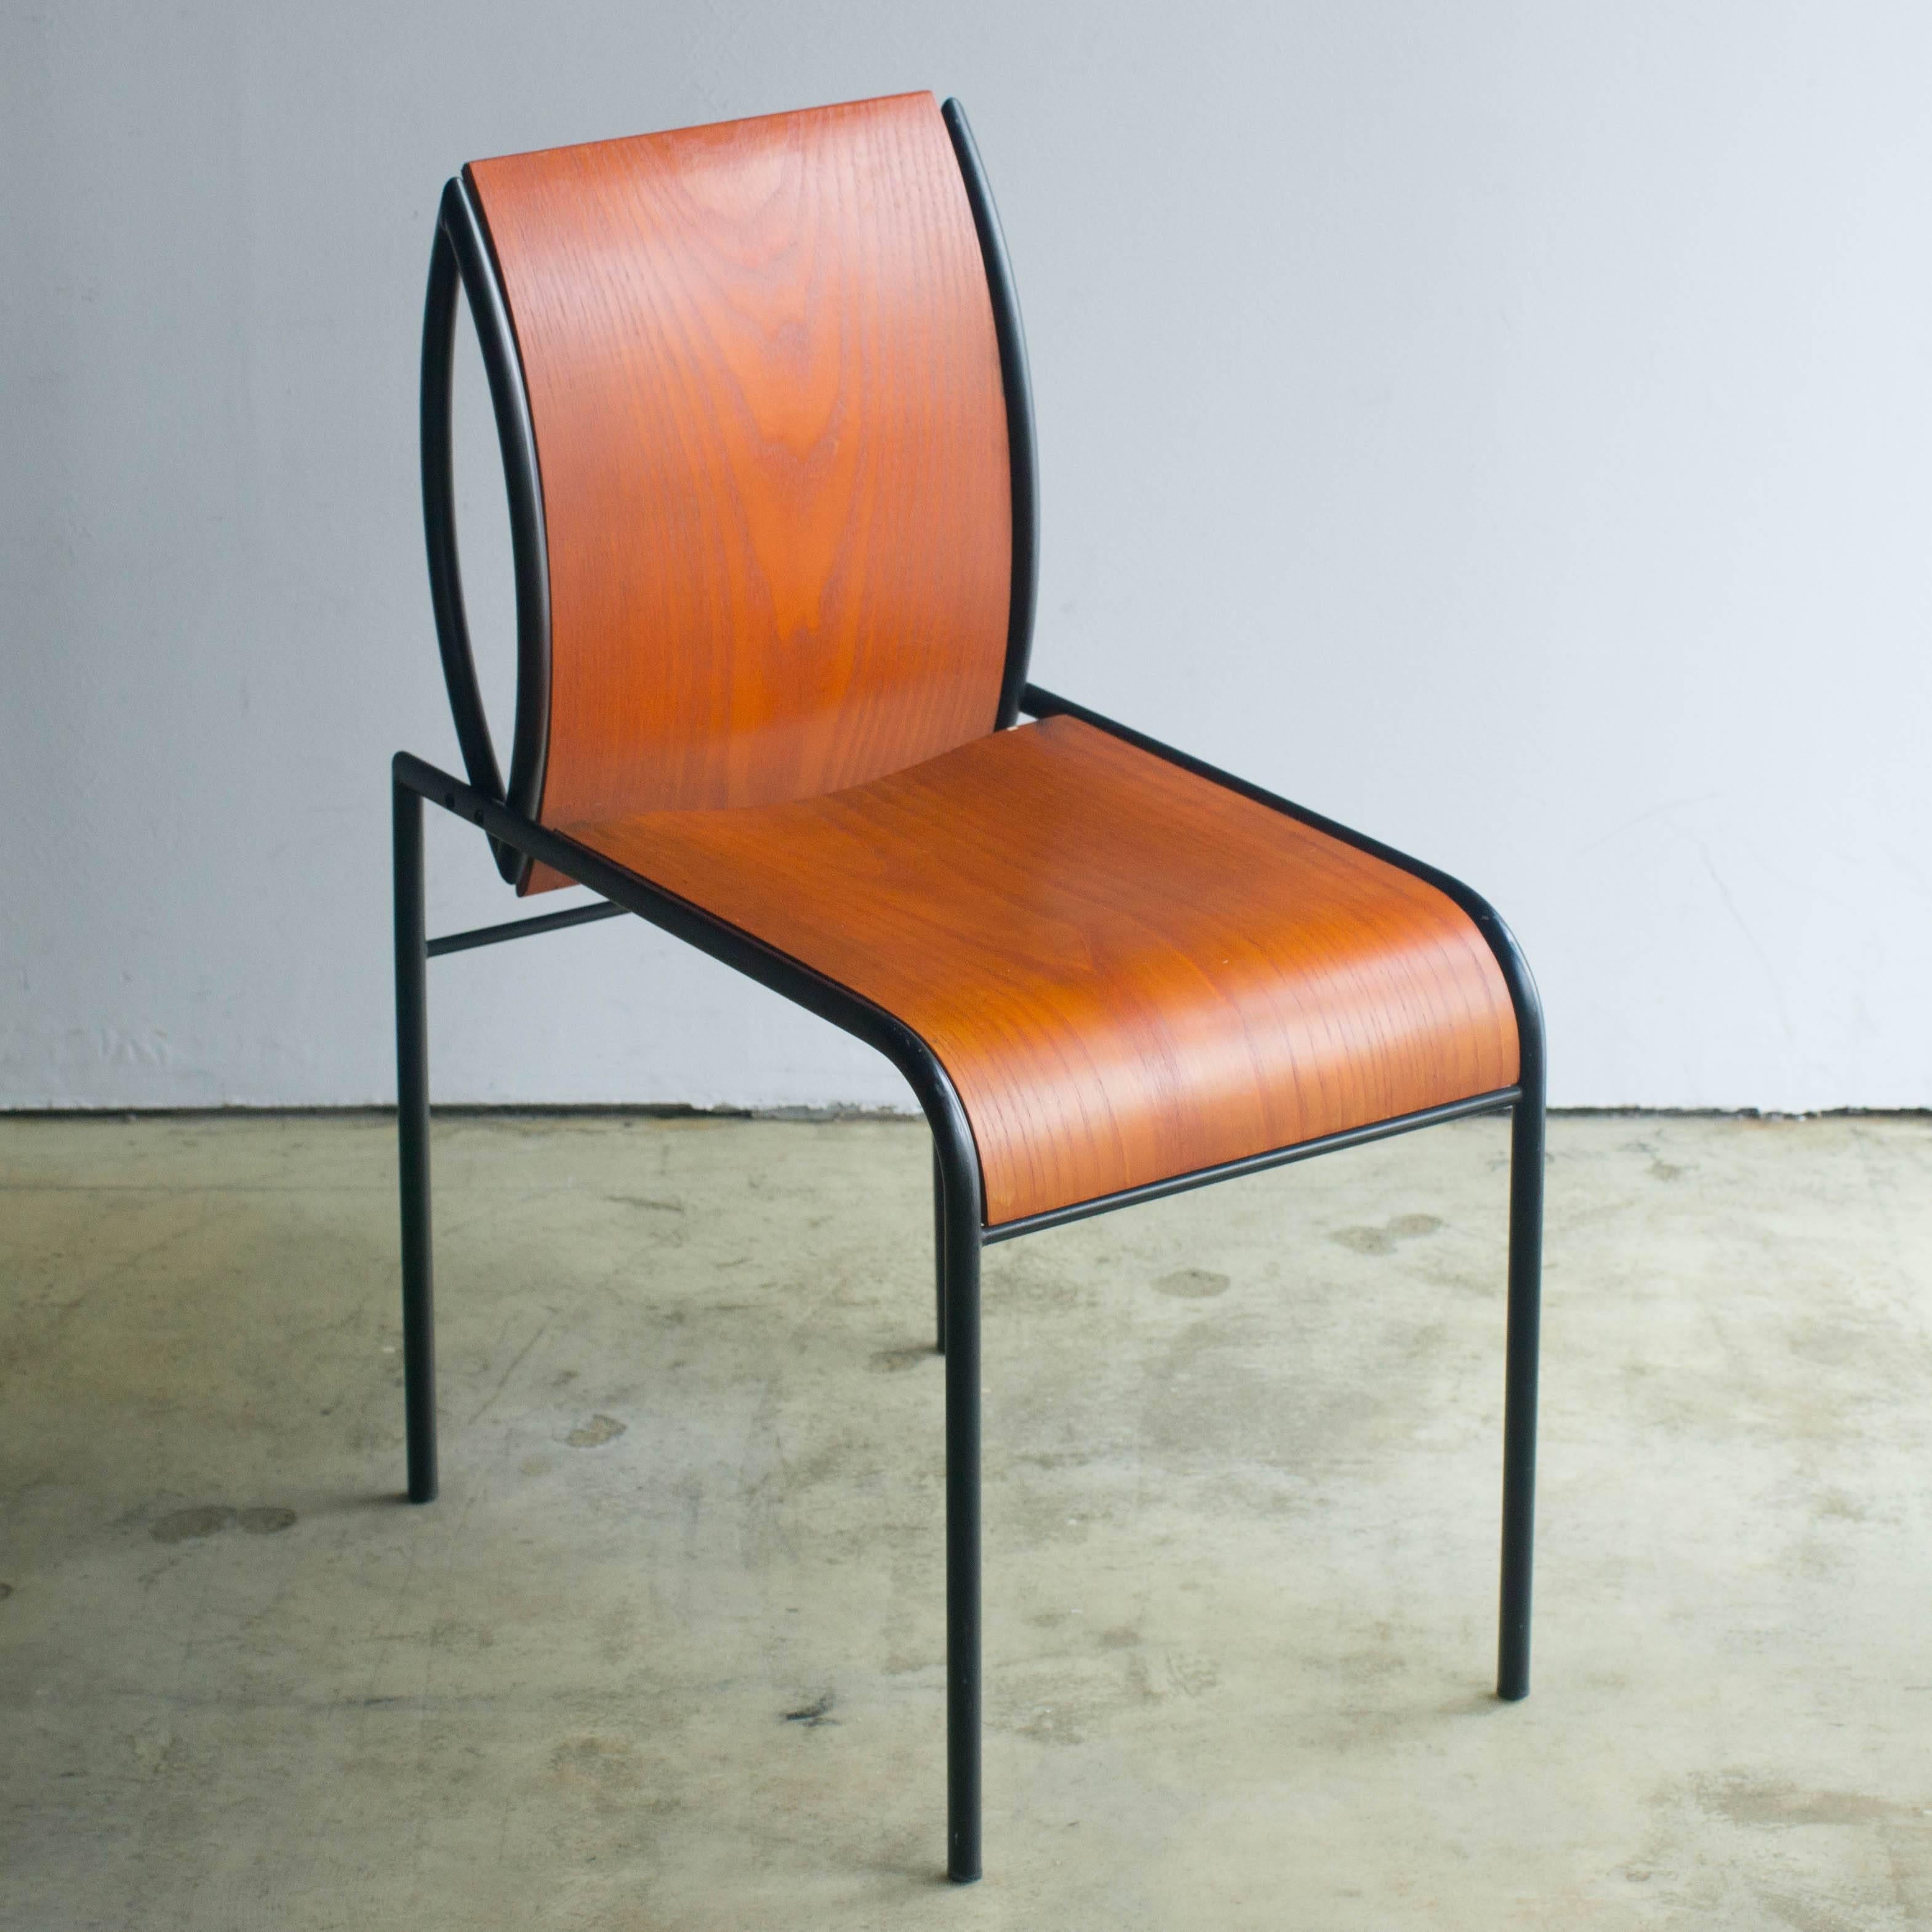 Post-Modern Kim Steel and Plywood Chair Michele De Lucchi for Memphis Original 1980s For Sale